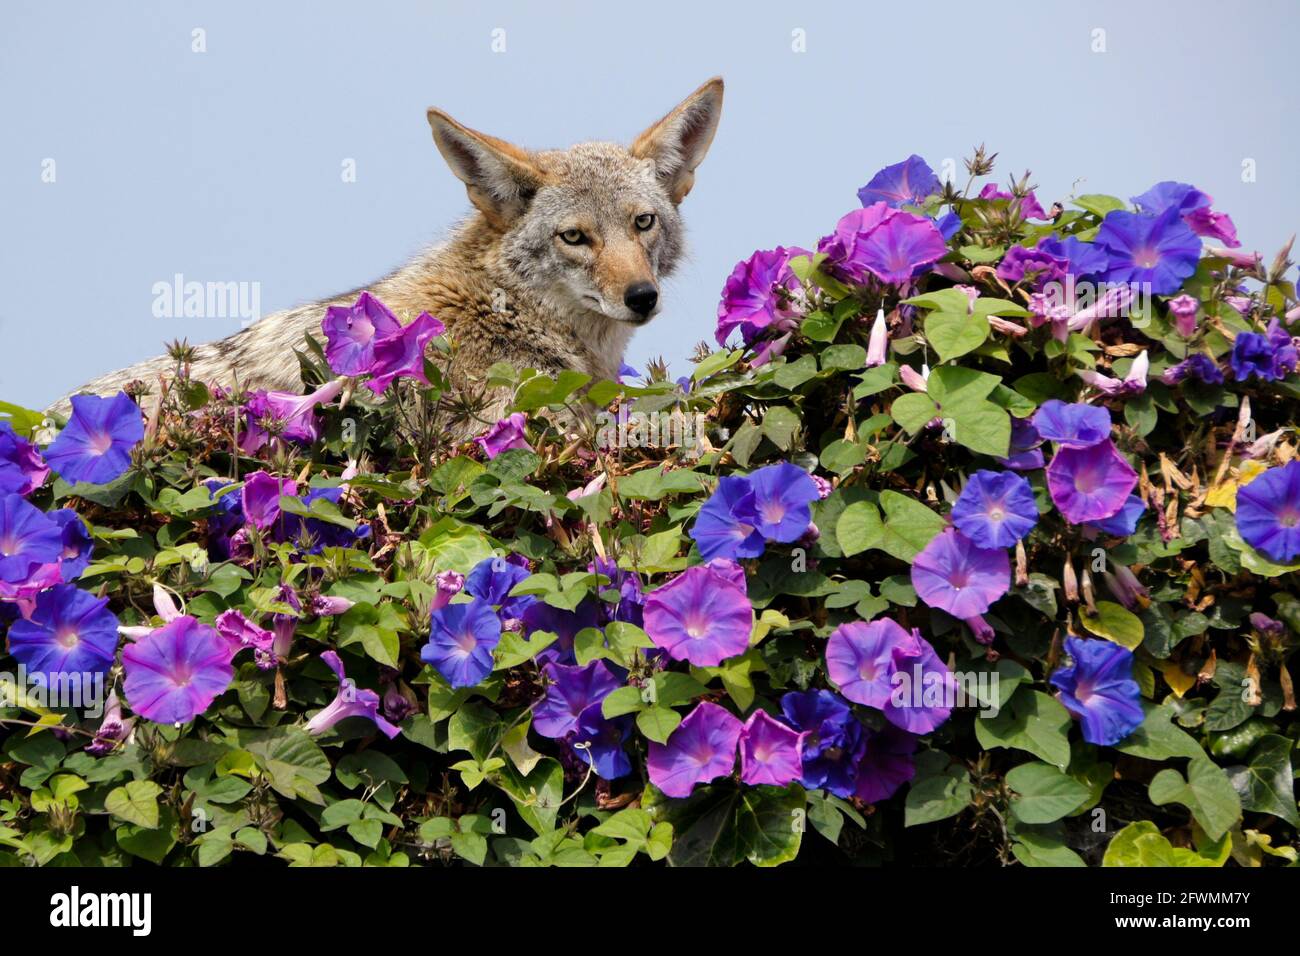 Coyote resting on top of wall covered in morning glories, Huntington Beach, Orange County, California Stock Photo